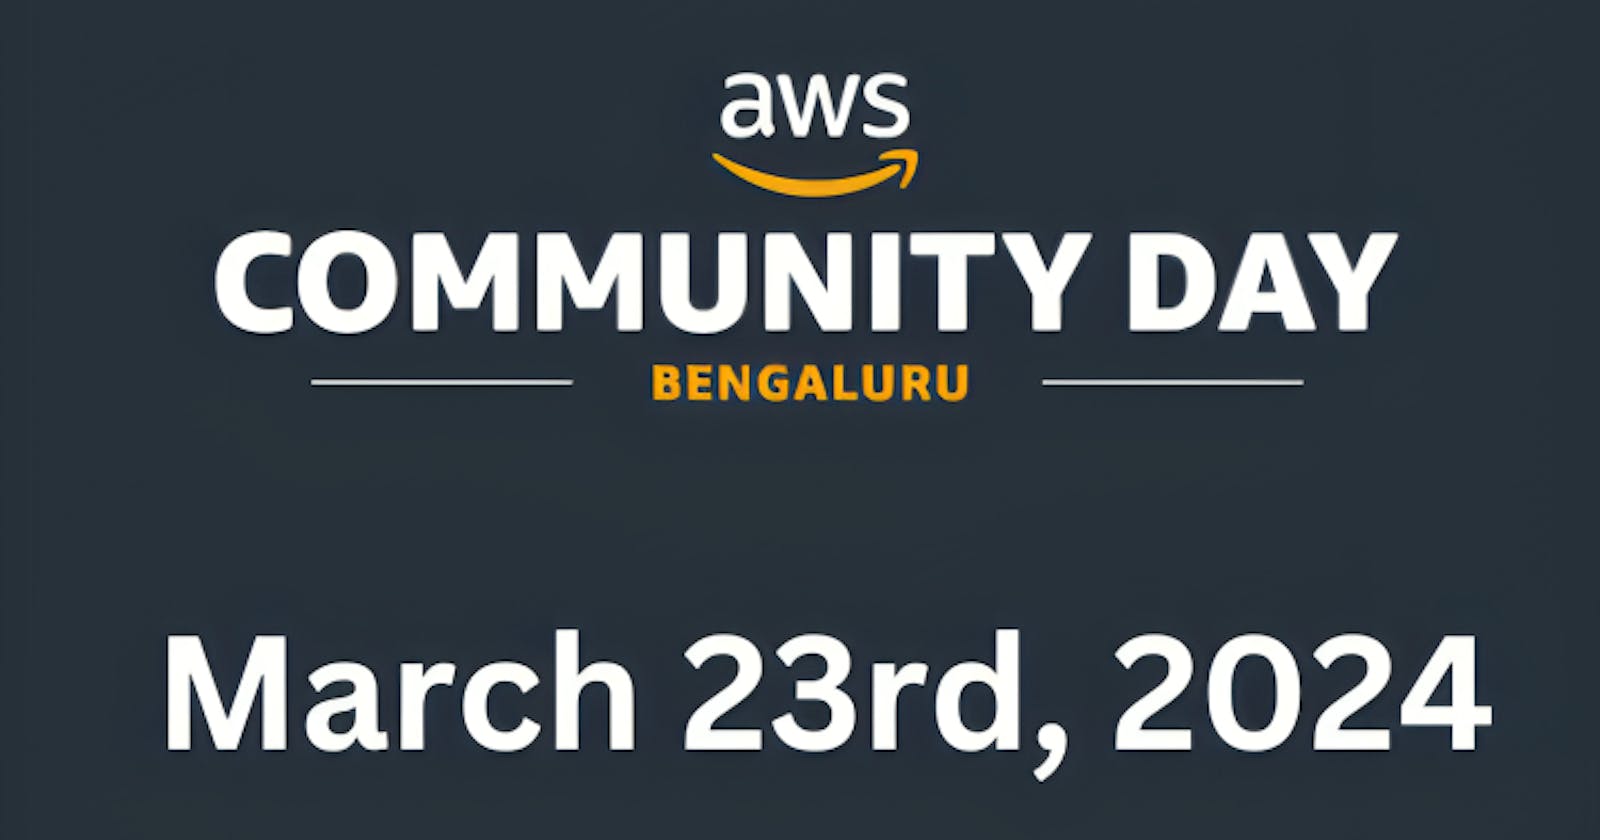 My Experience at AWS Community Day